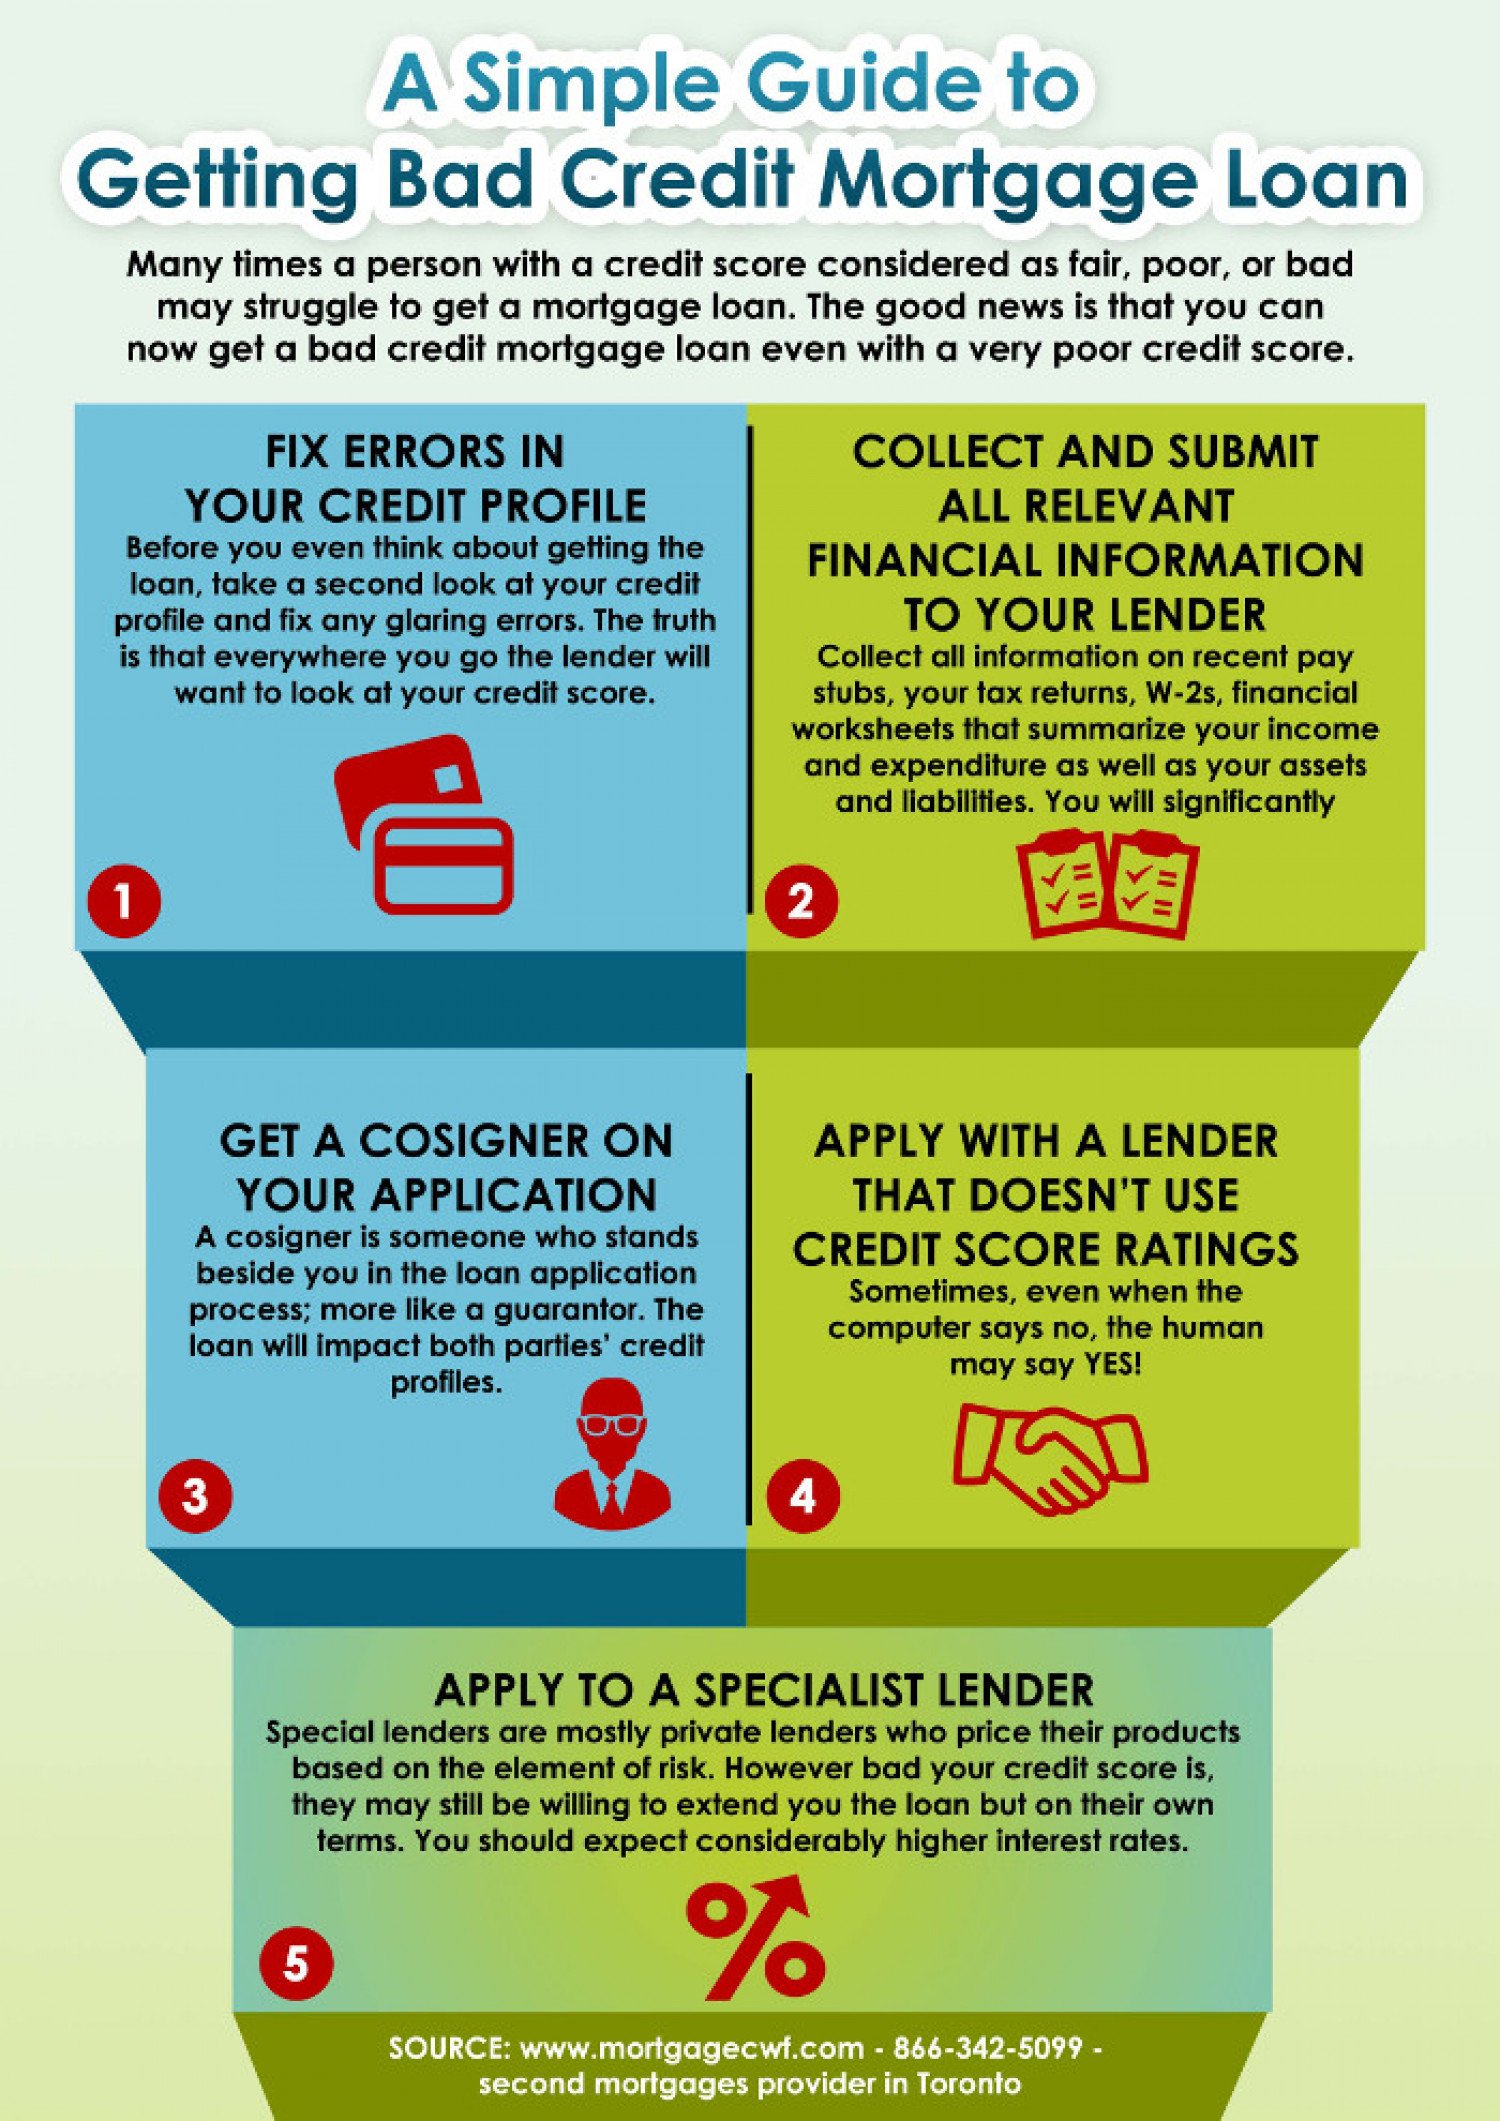 A Simple Guide to Getting Bad Credit Mortgage Loan